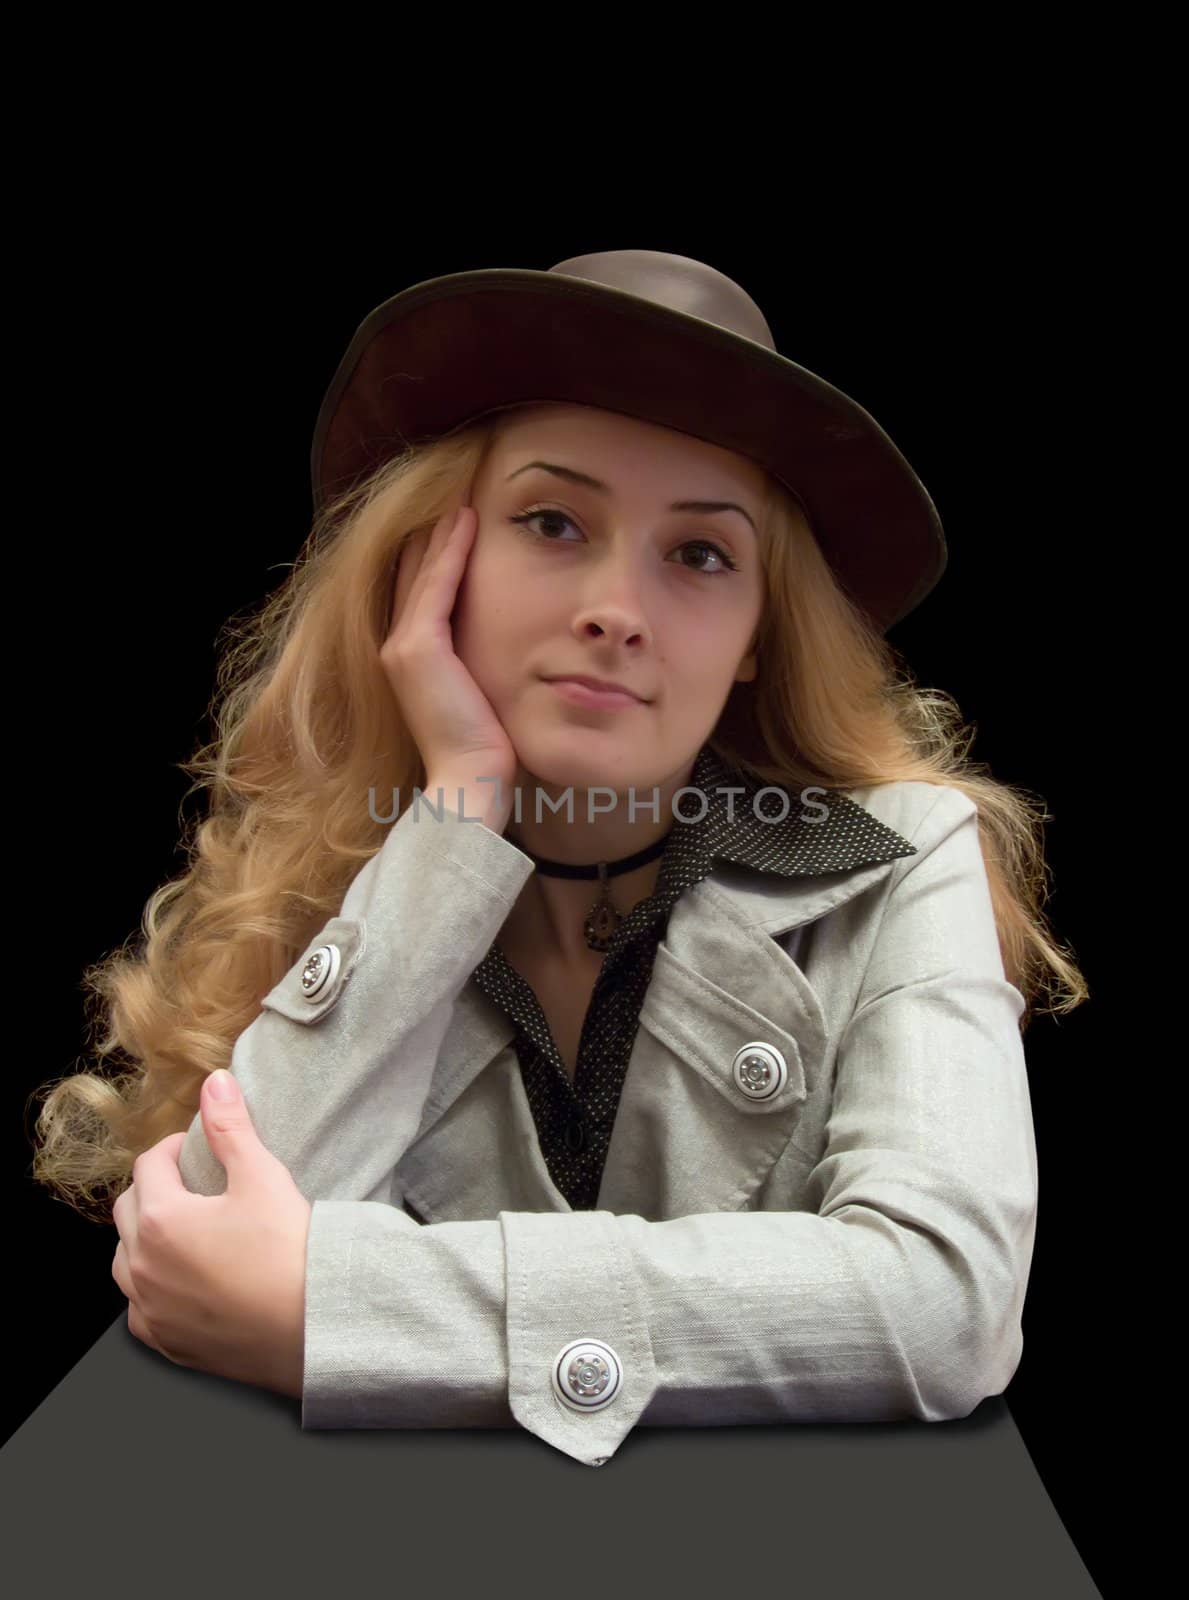 The long-haired girl in hat on black